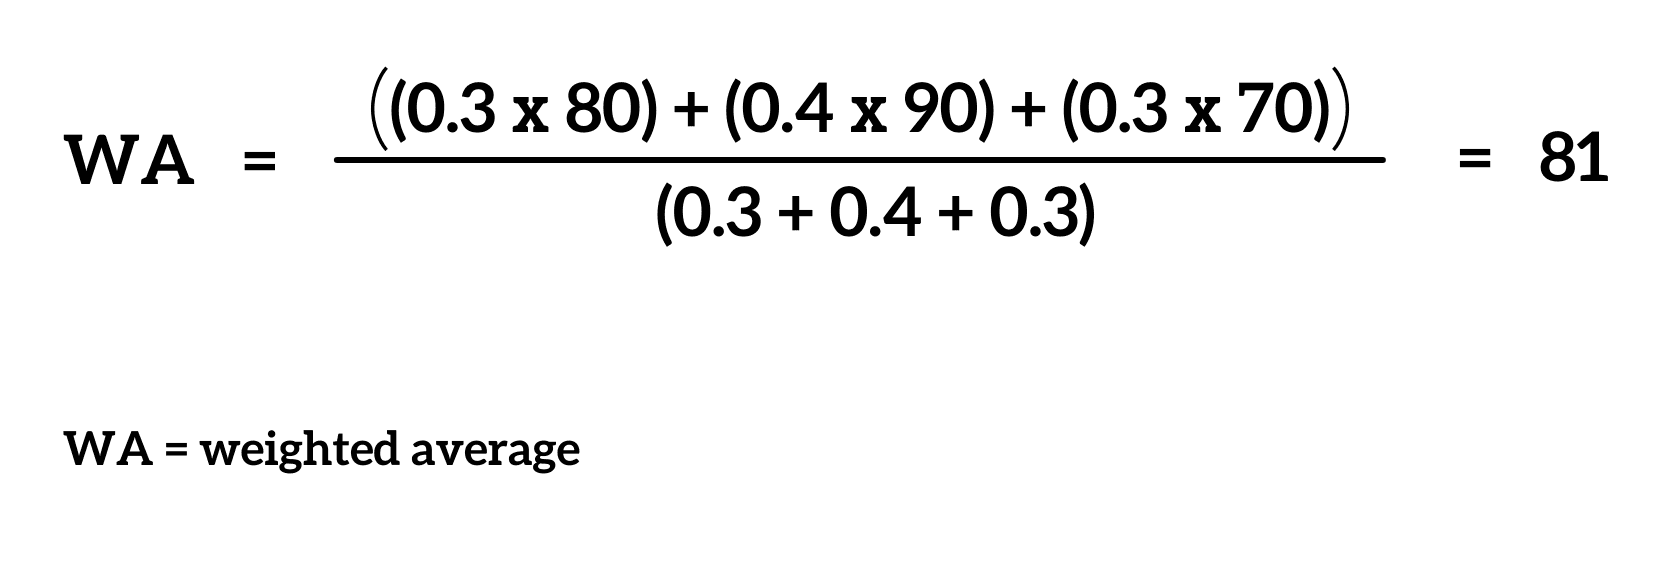 Example weighted average calculation